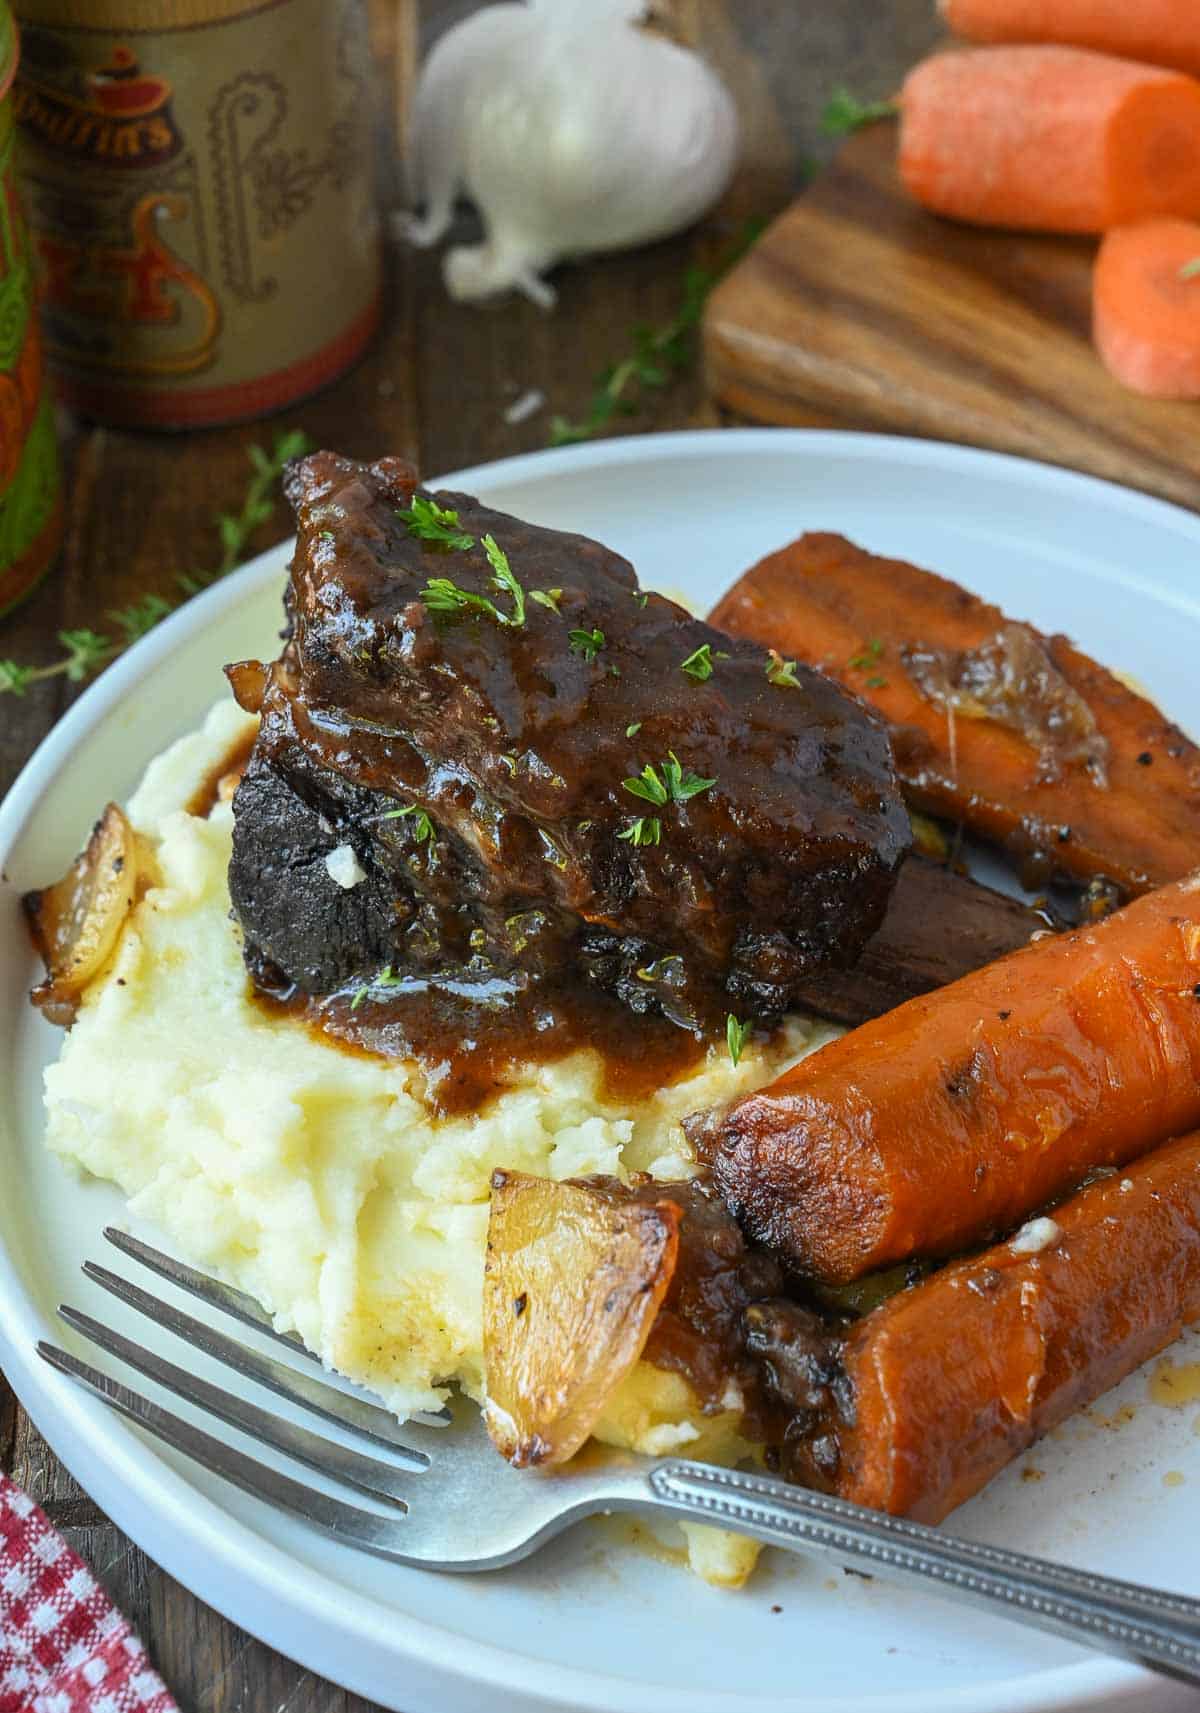 Wine braised short ribs with carrots and mashed potatoes on a plate.